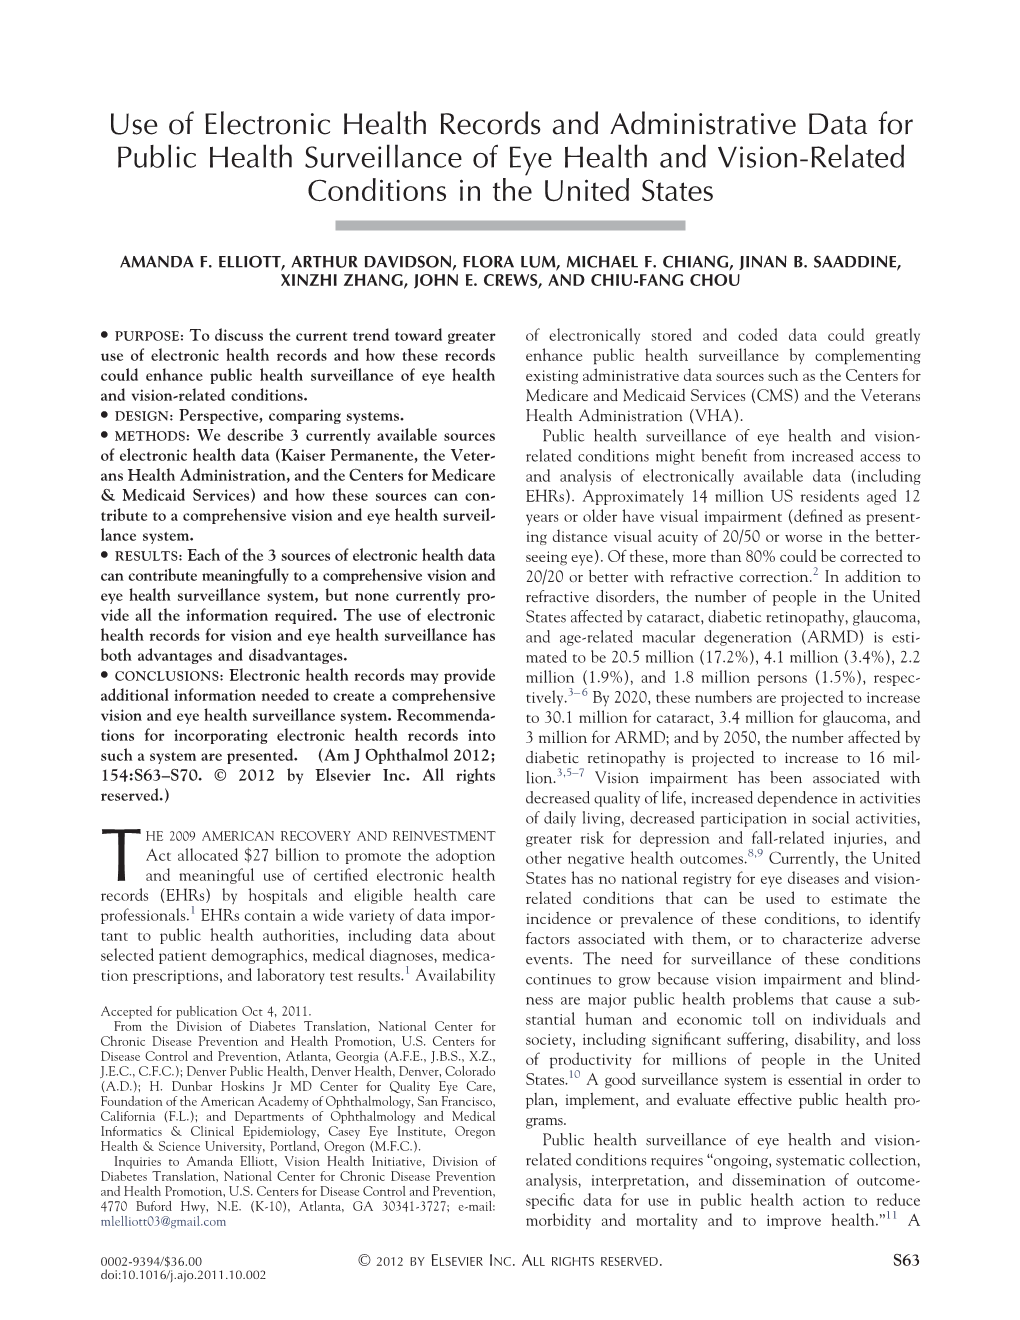 Use of Electronic Health Records and Administrative Data for Public Health Surveillance of Eye Health and Vision-Related Conditions in the United States